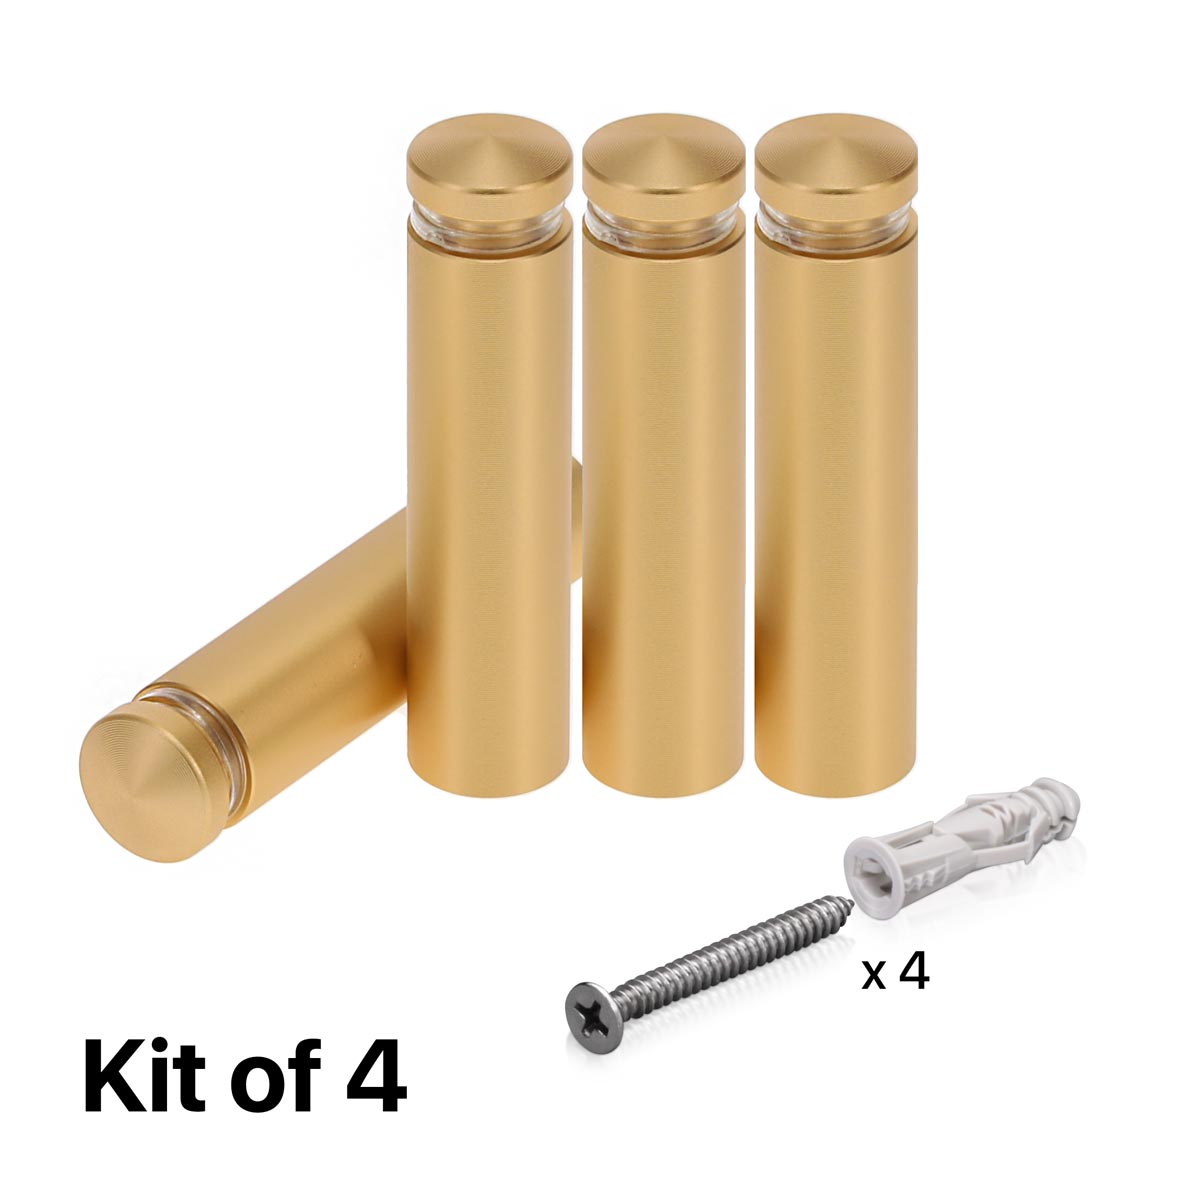 (Set of 4) 1/2'' Diameter X 1-3/4'' Barrel Length, Alumi. Rounded Head Standoffs, Matte Champagne Anodized Finish Standoff with (4) 2208Z Screw and (4) LANC1 Anchor for concrete or drywall (For In / Out use) [Required Material Hole Size: 3/8'']